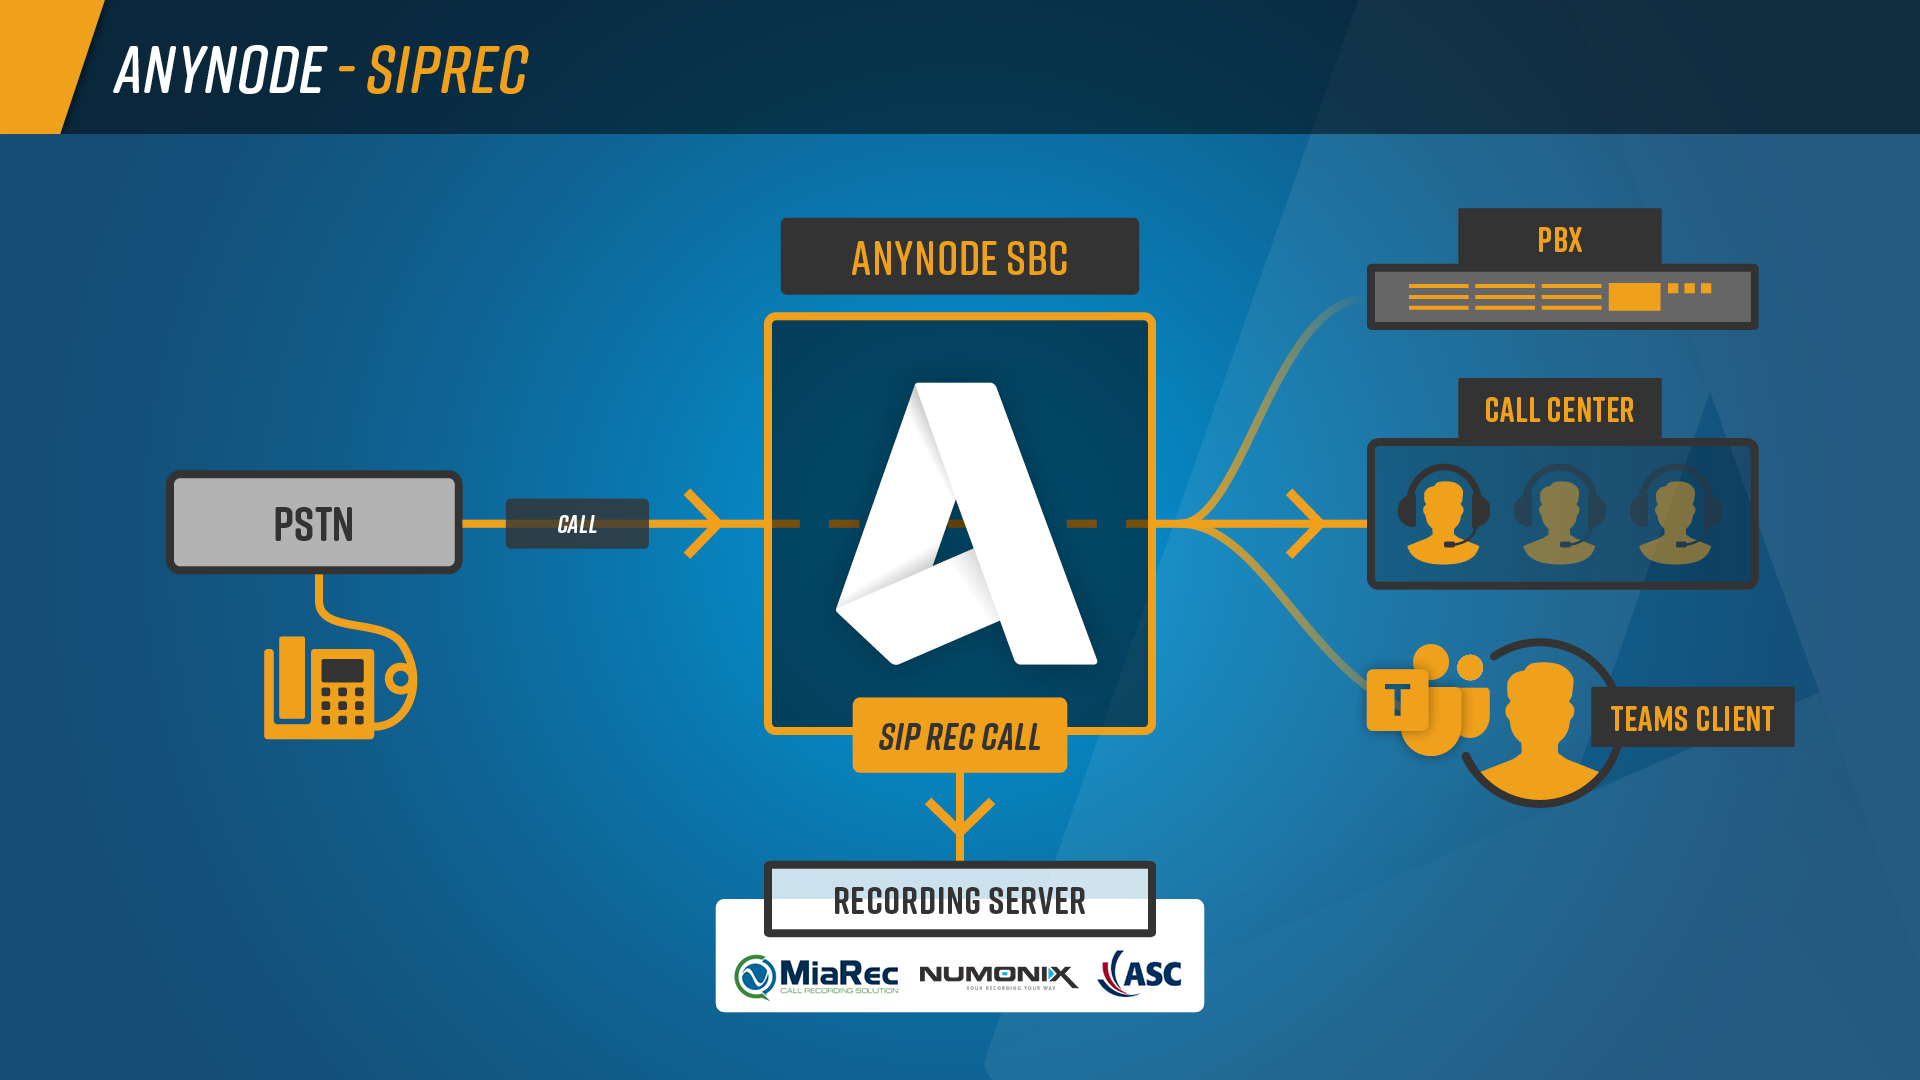 Infographic: anynode SIPREC with an additional SIP call to a recording server, like MiaRec, Numonix, ASC Technologies